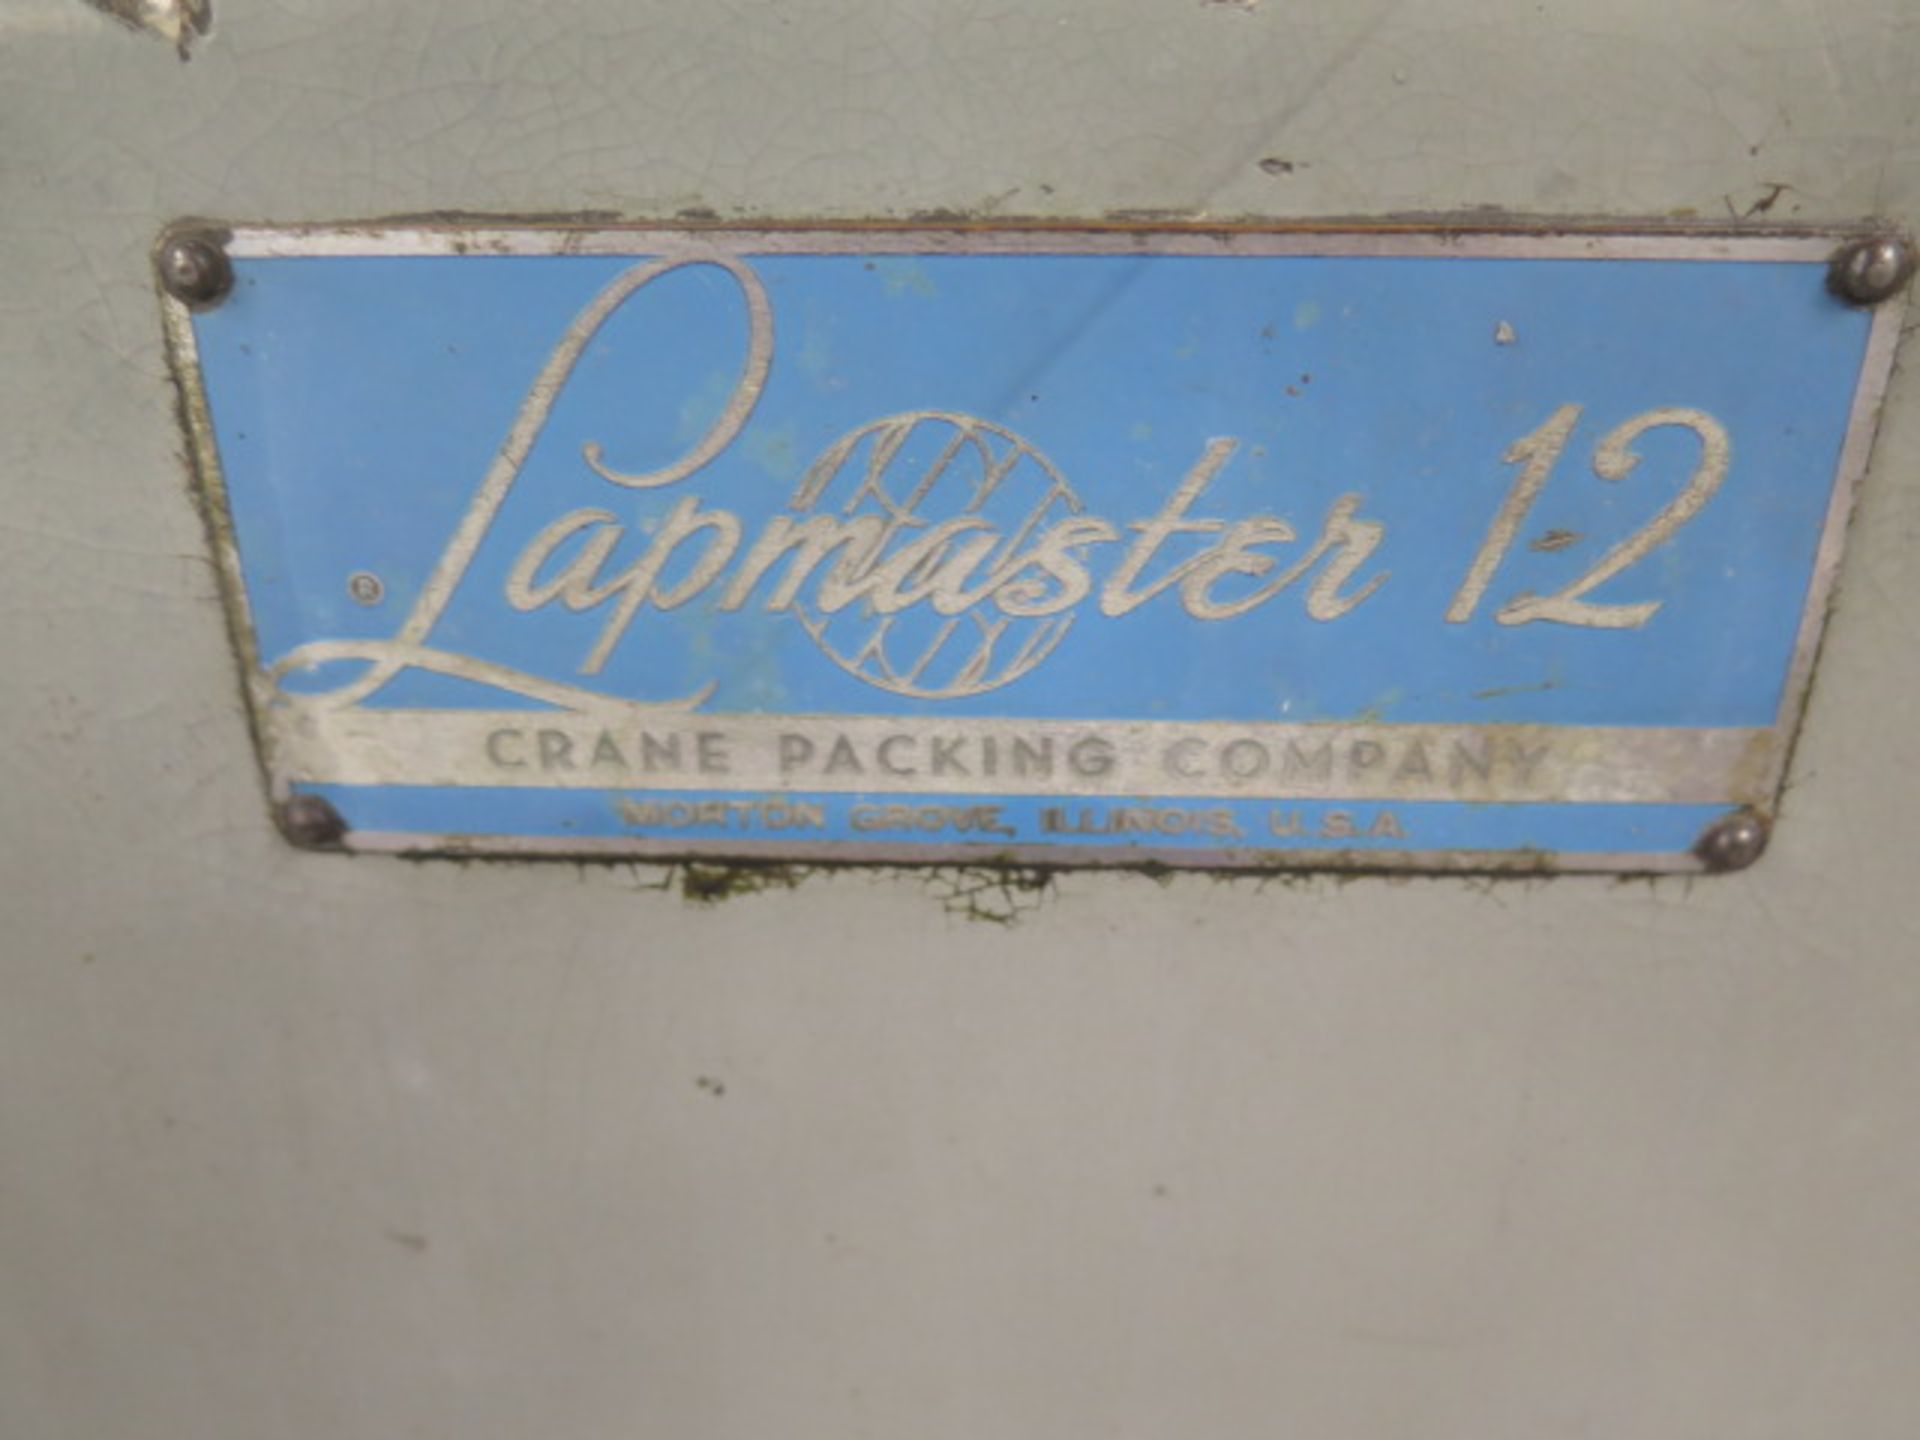 Crane “Lapmaster 12” 12” Lapping Machine w/ Compound Dispenser (SOLD AS-IS - NO WARRANTY) - Image 3 of 7